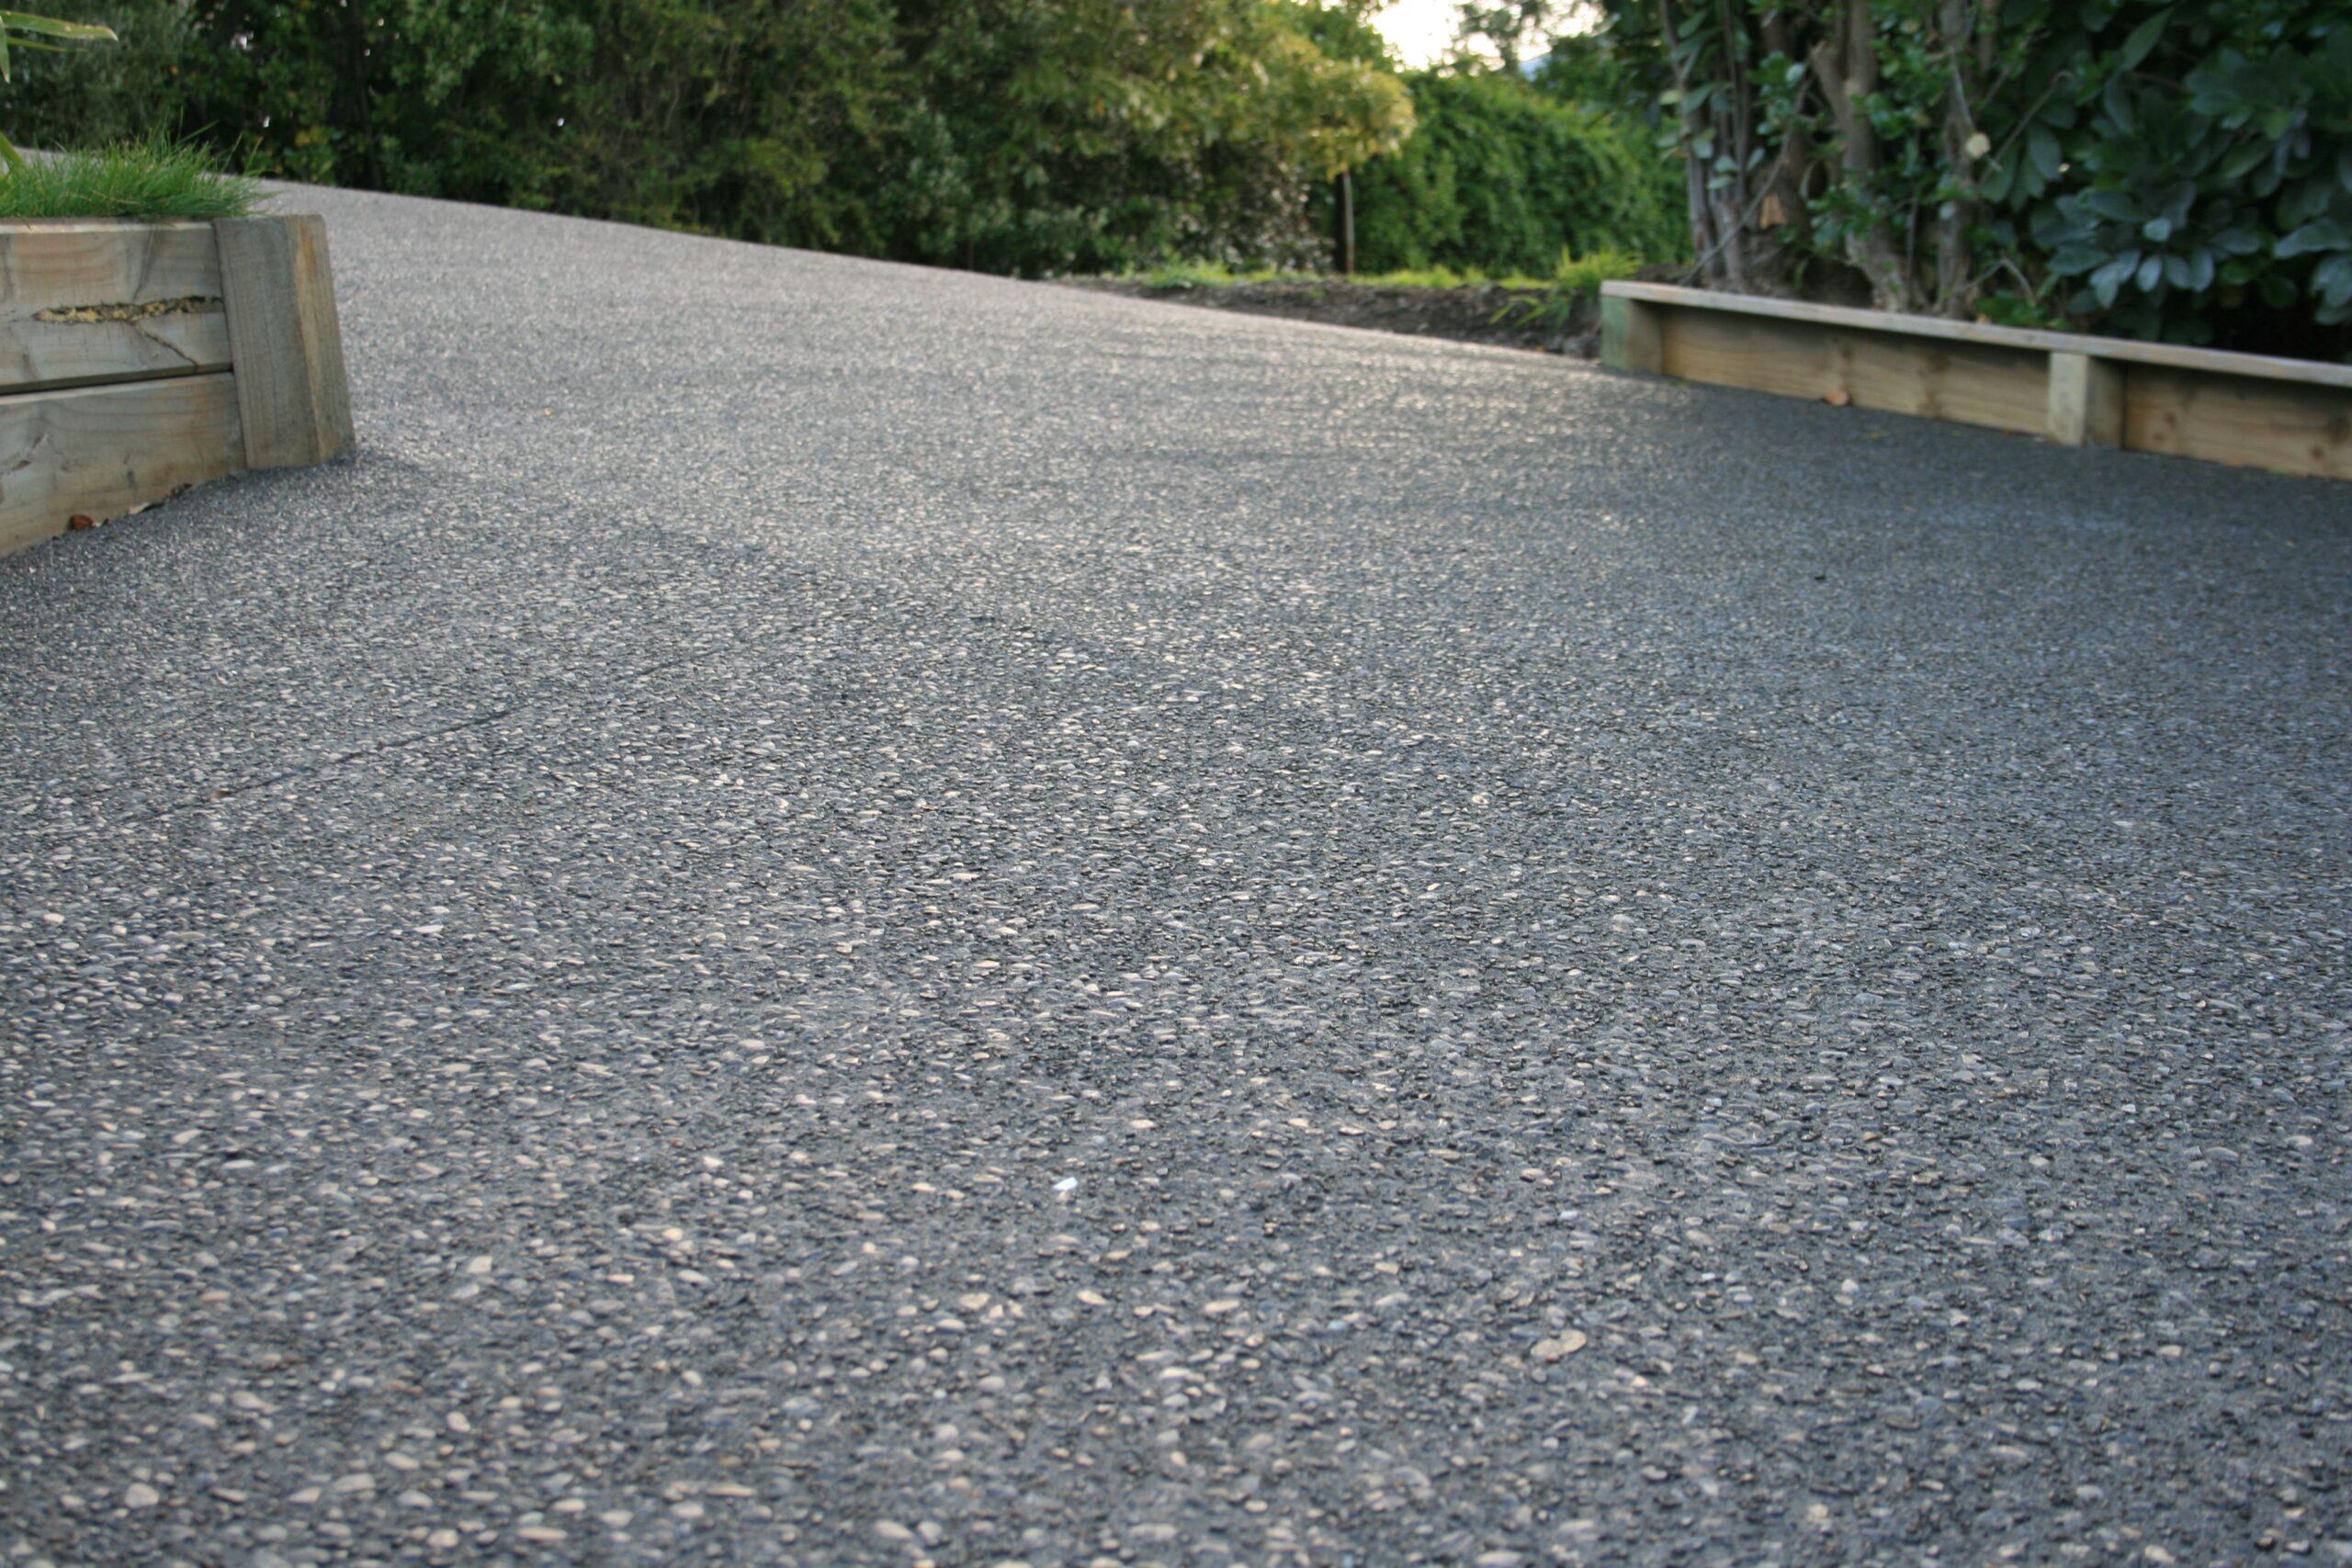 EXPOSED AGGREGATE benefits